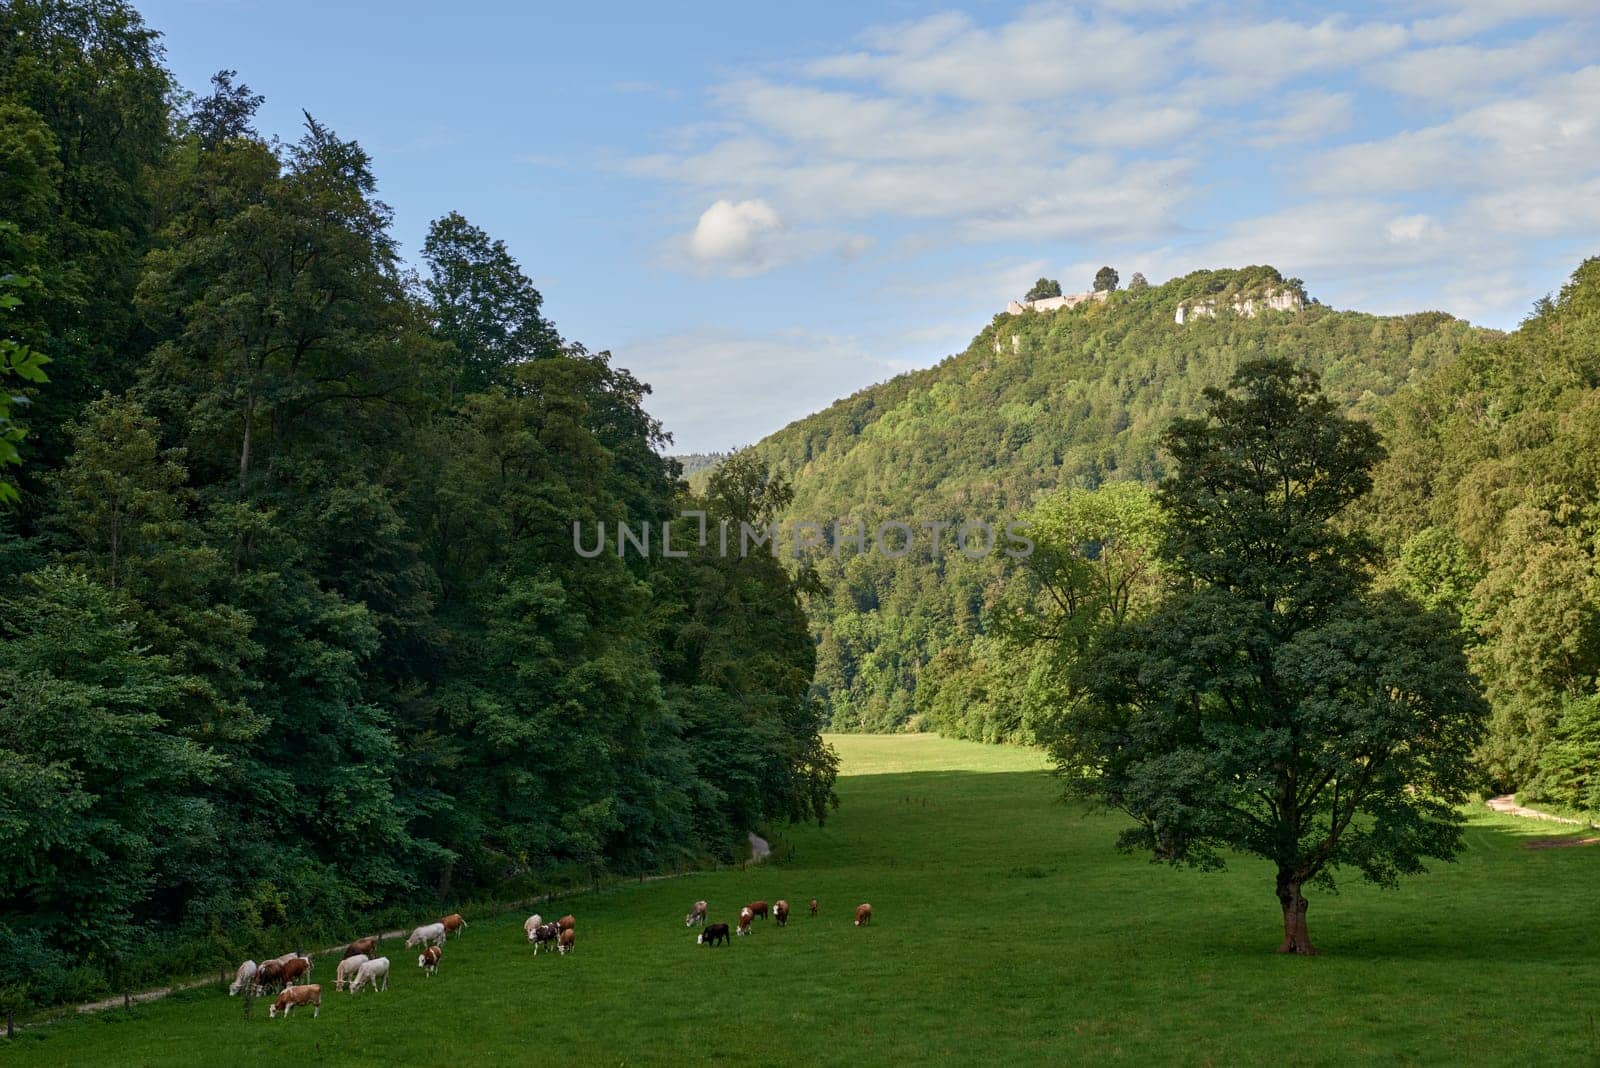 Panoramic shot of heard of sheep grazing on the green meadows with mountains in backdrop. Dramatic aerial view of idyllic rolling patchwork farmland with pretty wooded boundaries, lit in warm early evening sunshine.